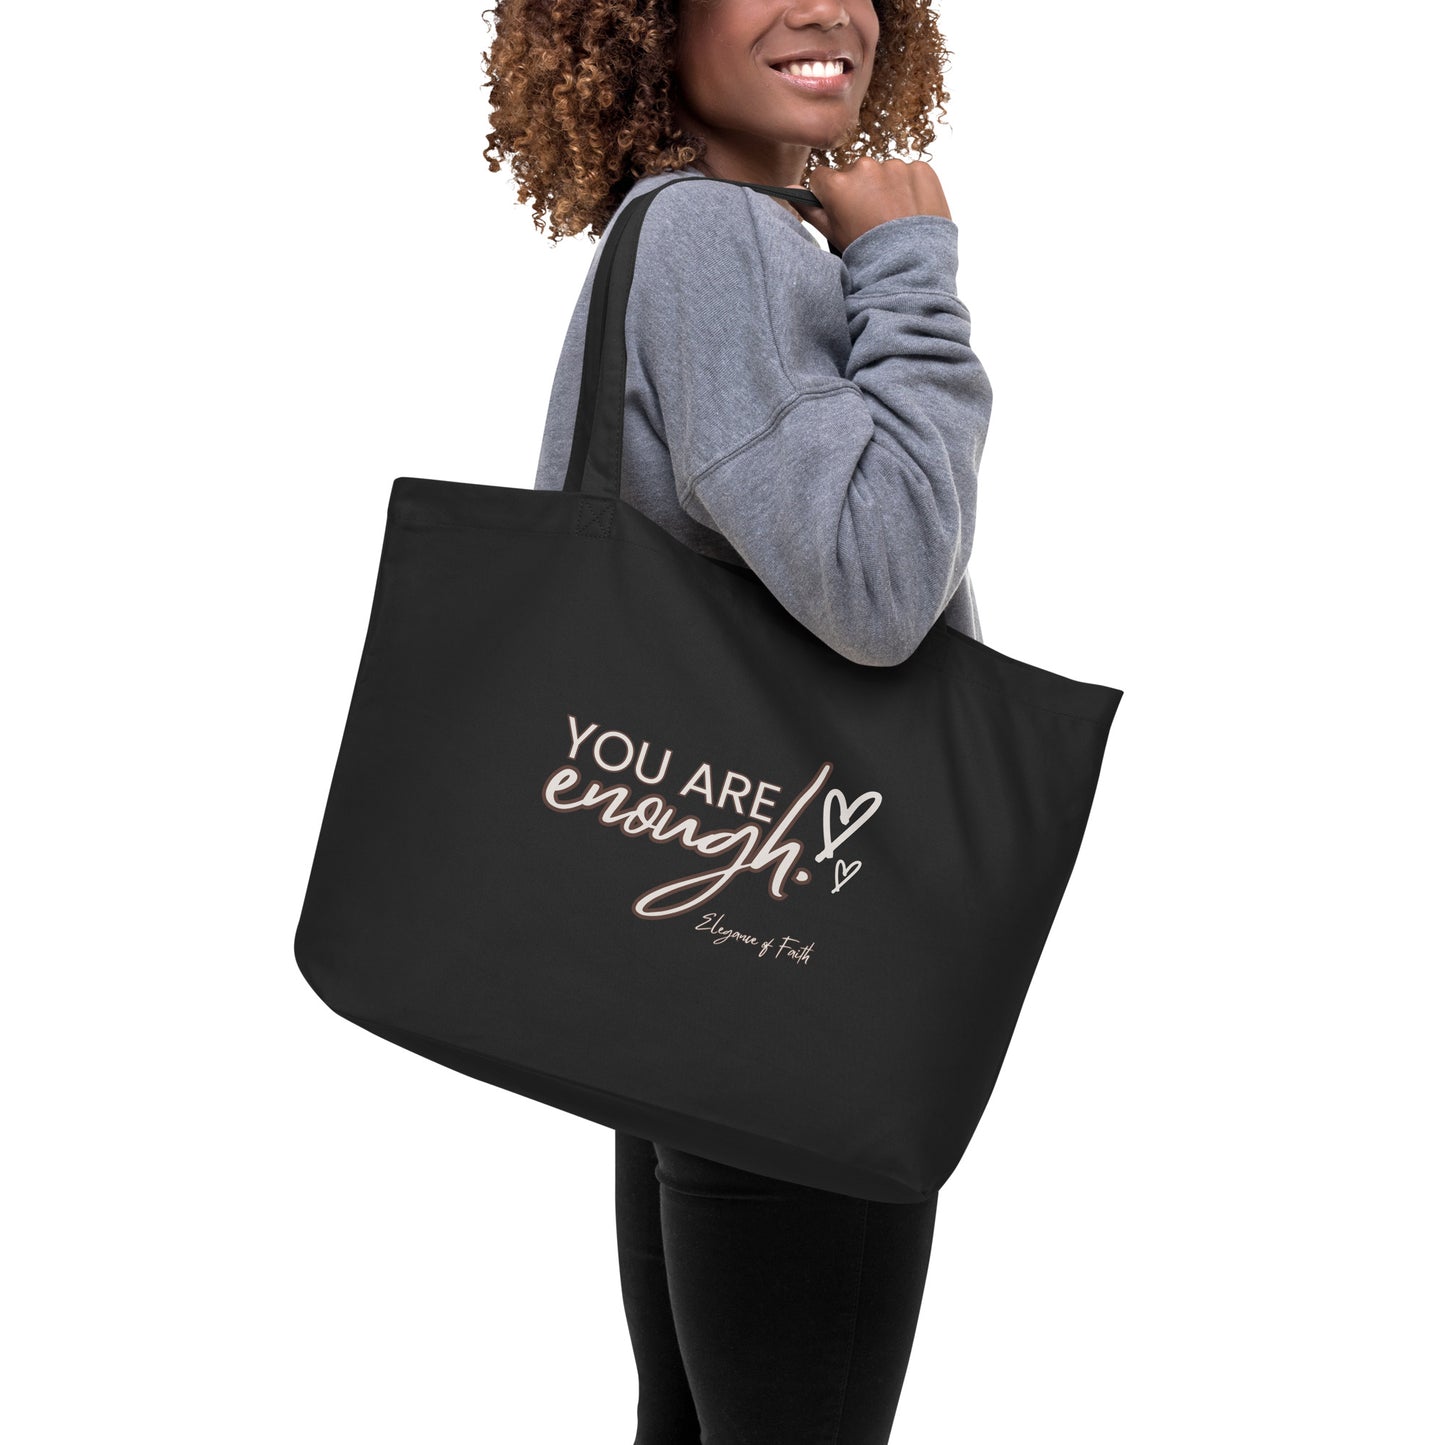 "You Are Enough" Large organic tote bag